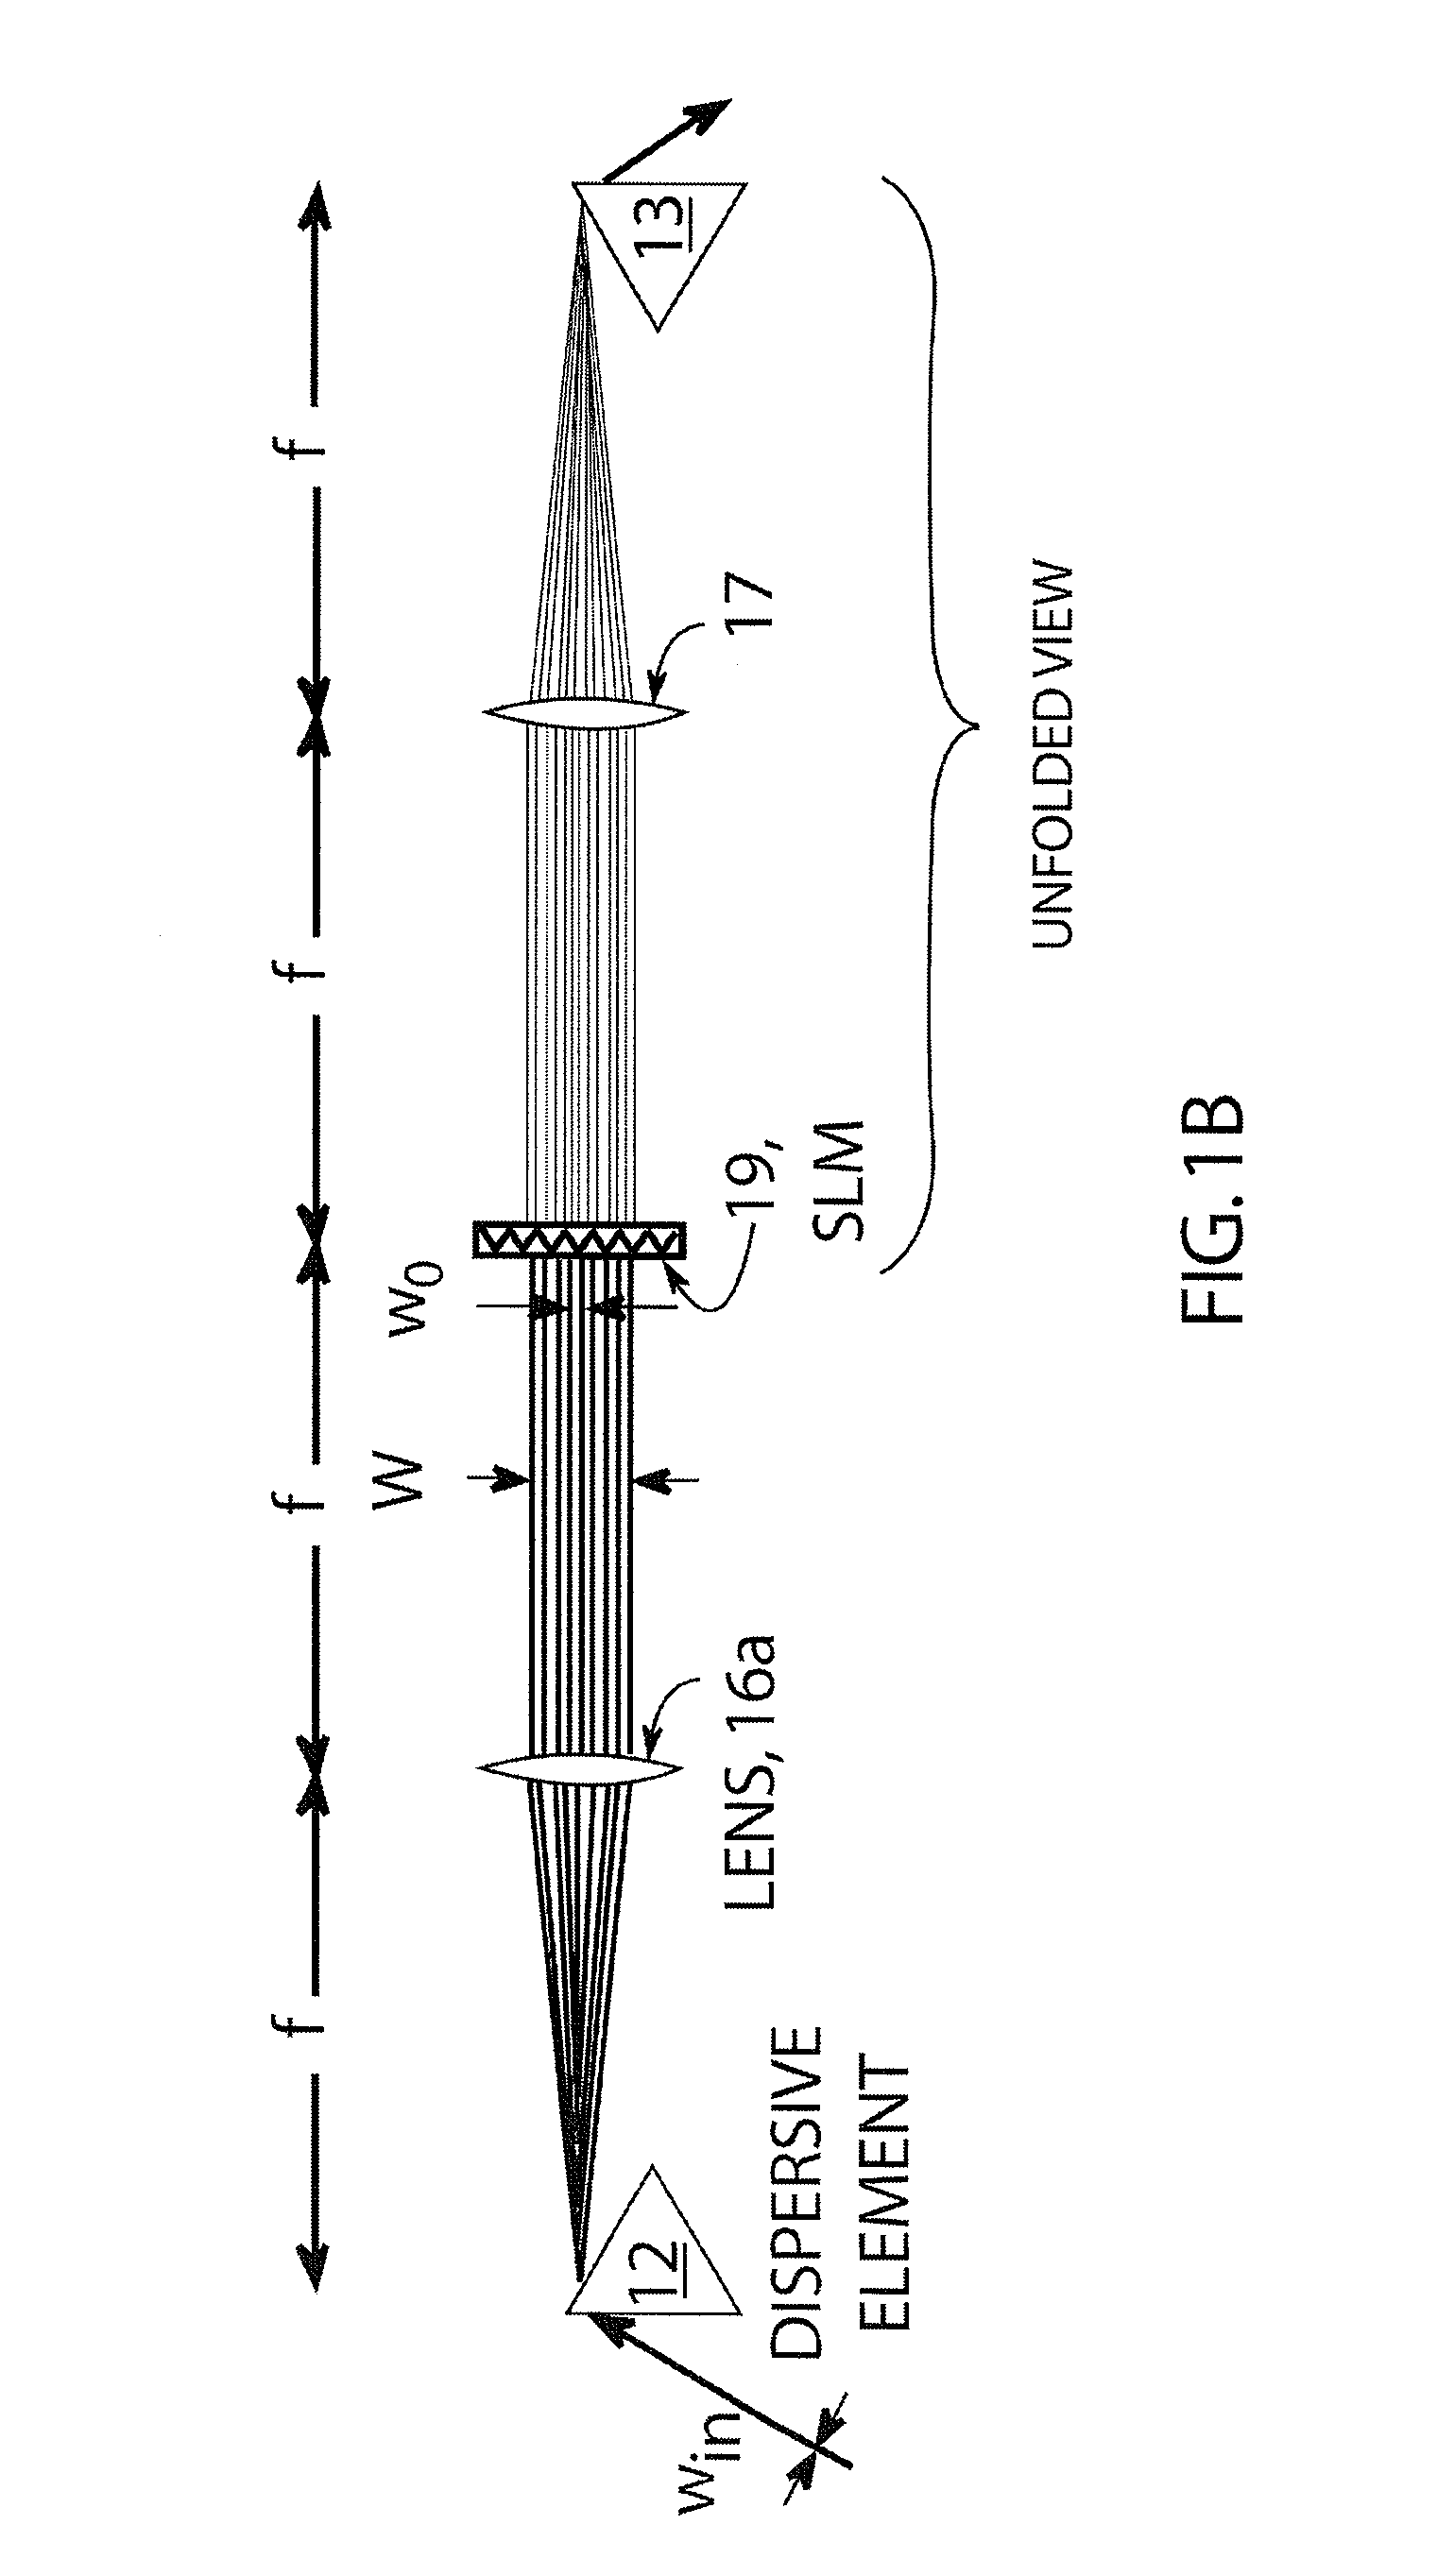 Phase and amplitude light pulse shaping using a one-dimensional phase mask